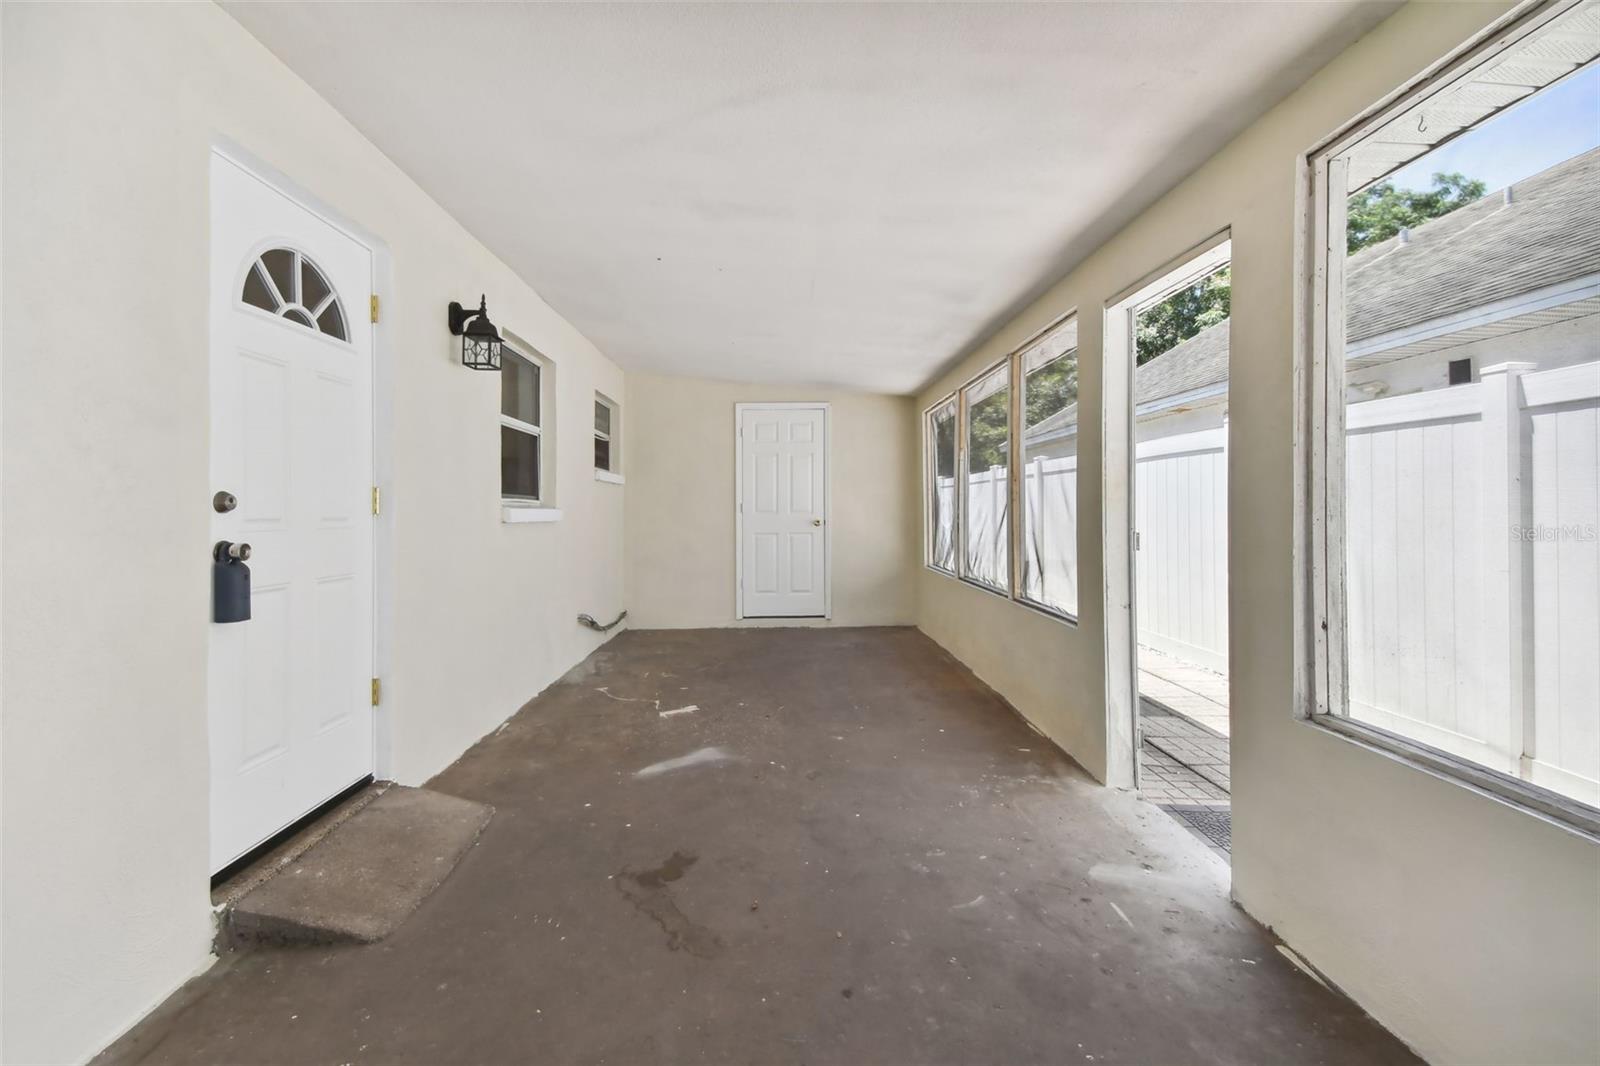 Large screen-enclosed side porch, leads to the interior of the home, the laundry/storage room and the backyard. Perfect for rainy day entertaining. Or enclose into a game/family room.